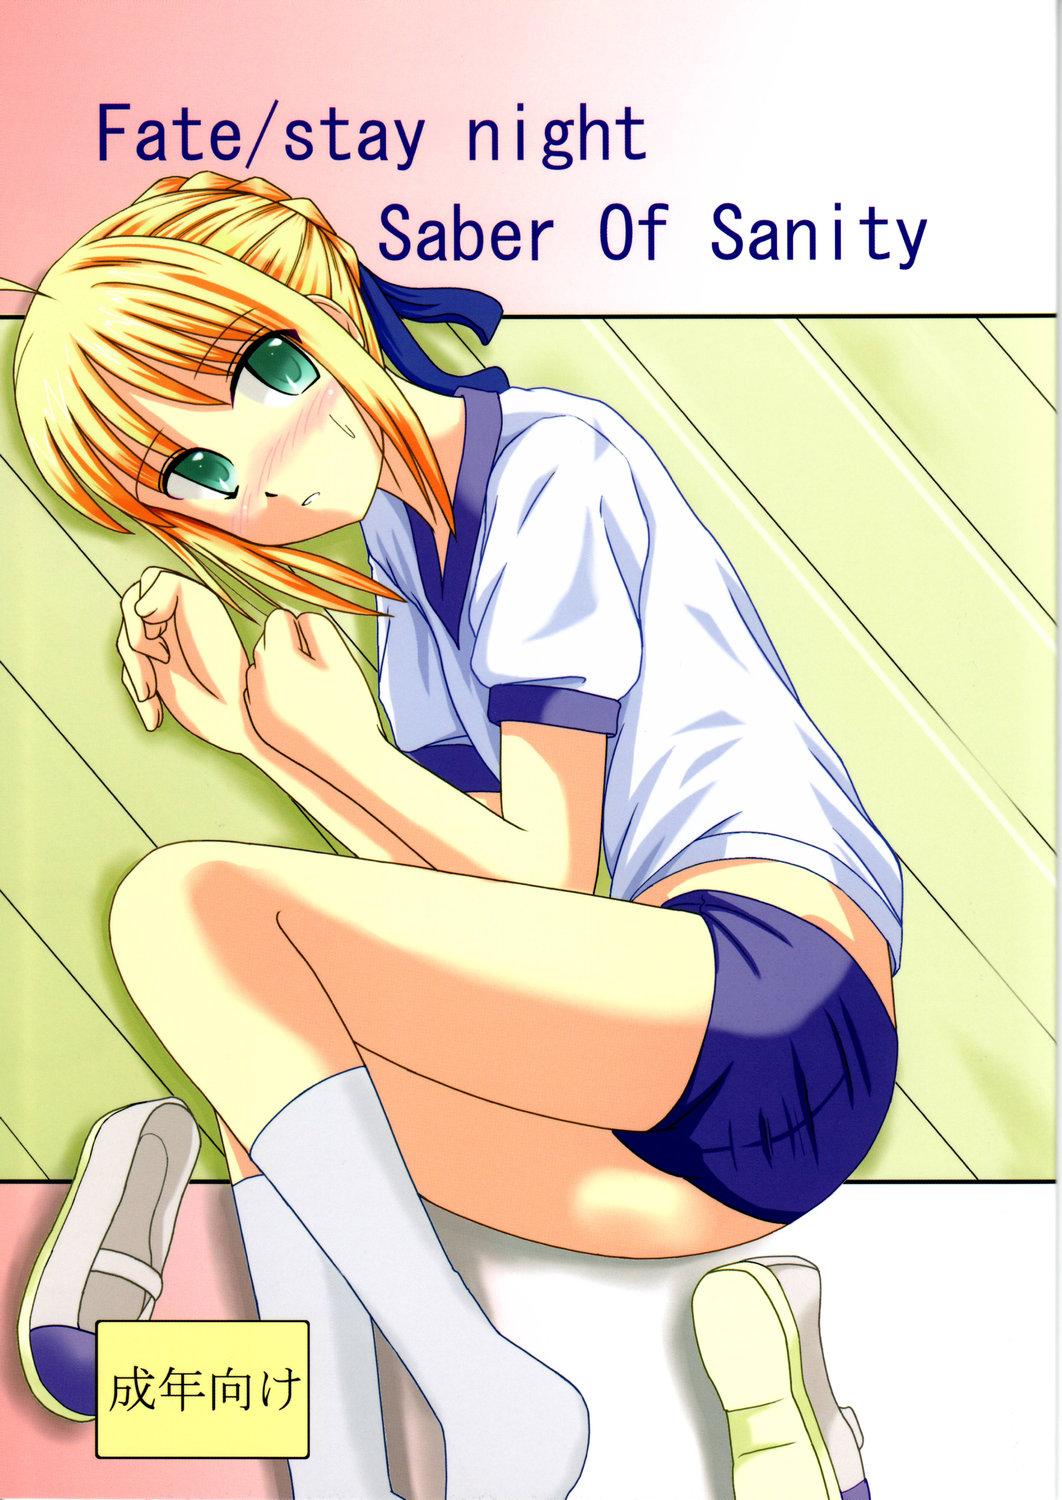 Gay Oralsex Saber Of Sanity - Fate stay night Ruiva - Page 1